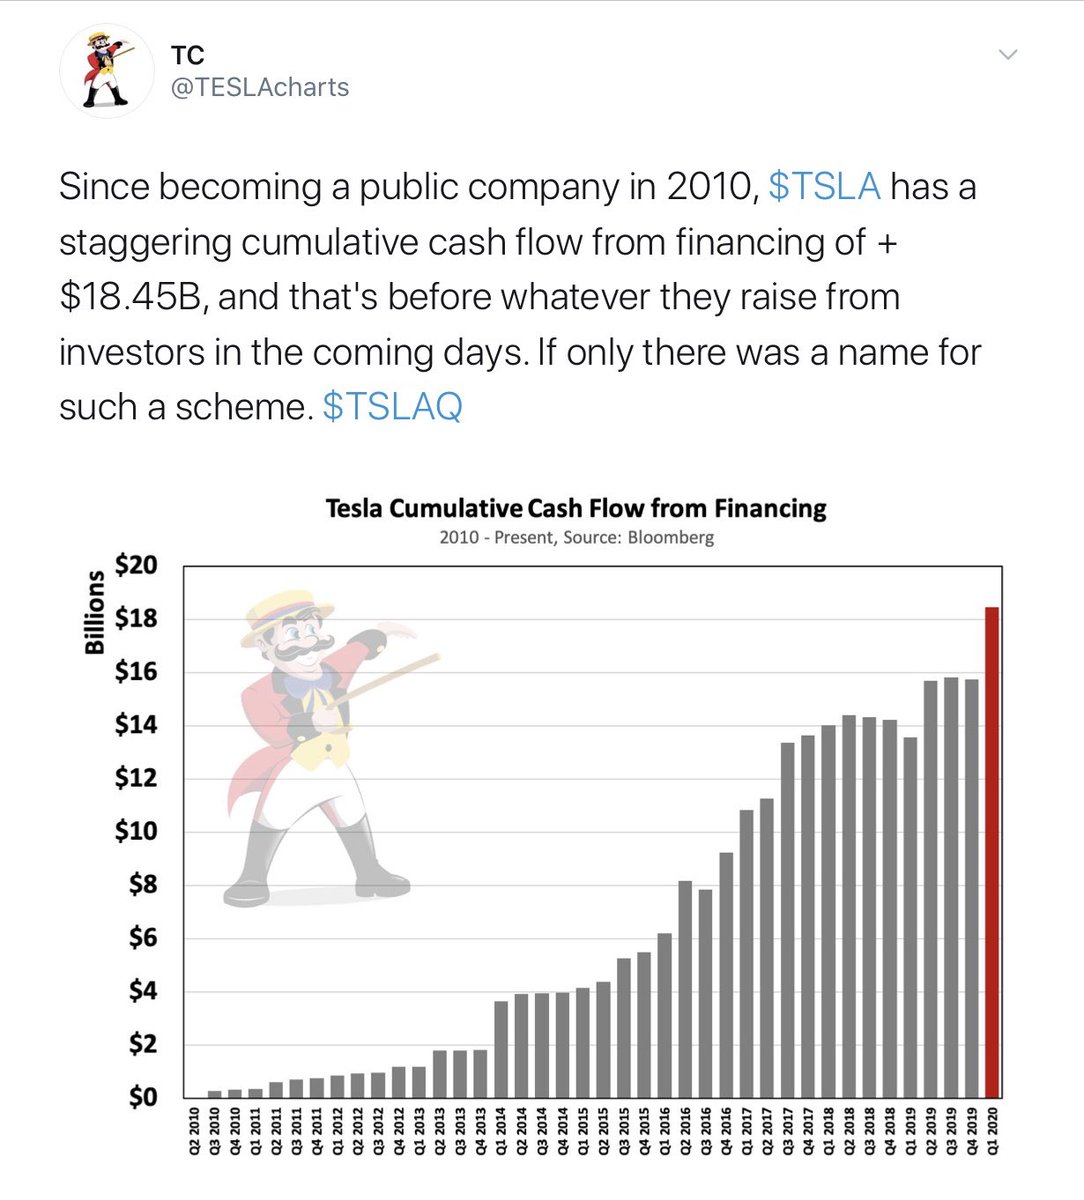 THE STRANGE CASE OF THE BARKING DOG @TESLACharts loves to post images on Twitter that many interpret as attacks on TSLABut sometimes he is really giving TSLA enormous creditFor example, he says that TSLA has raised Cash from Financing in the amount of $18.45 billion